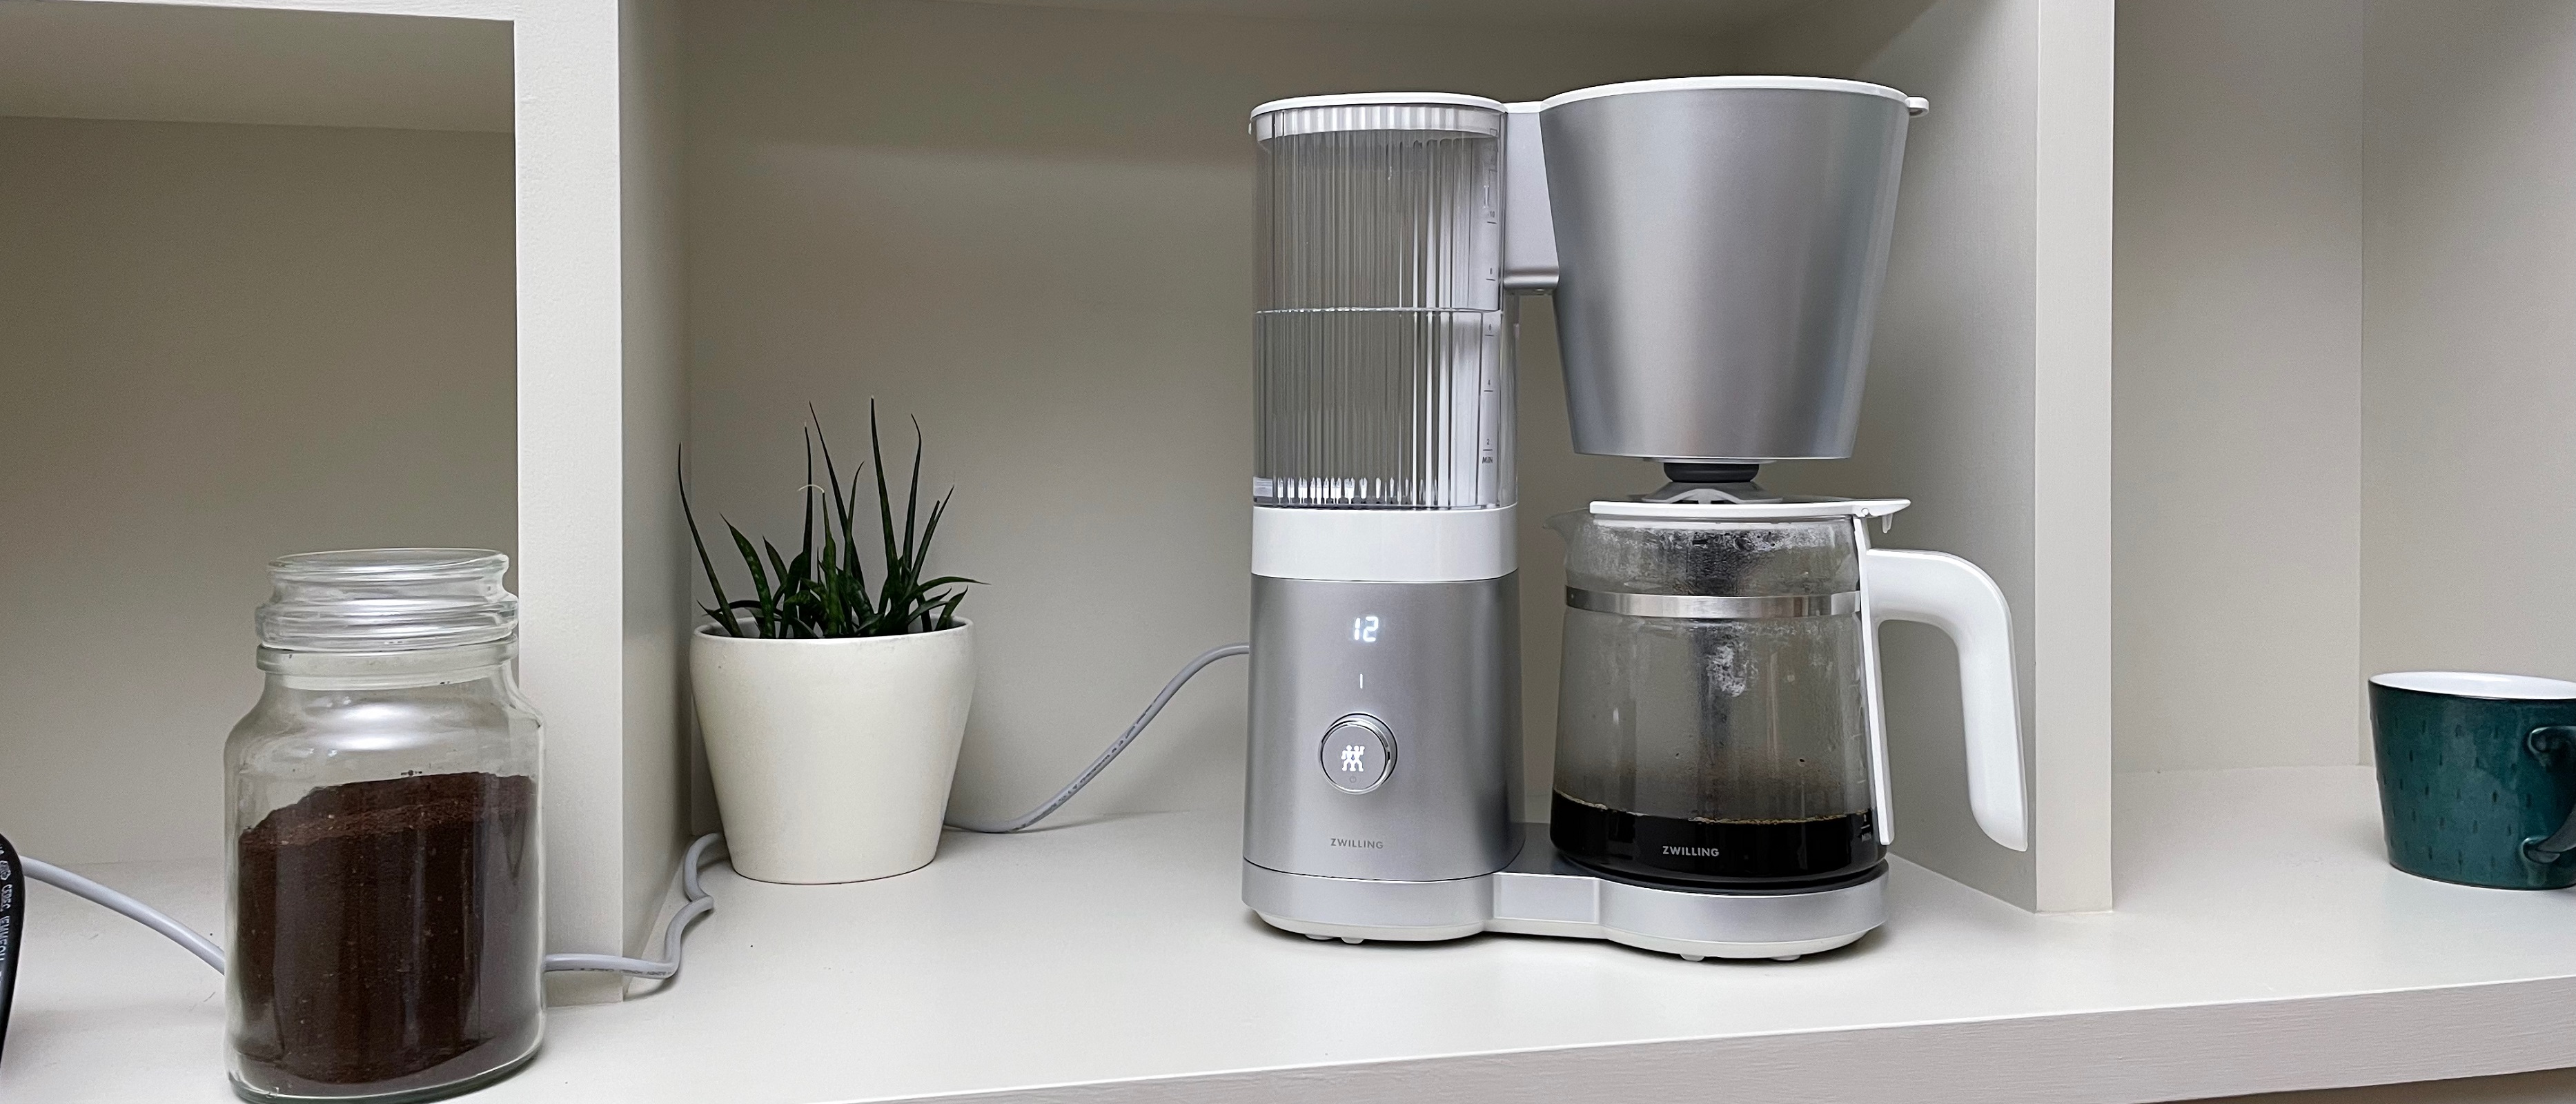 High-end drip coffee makers that take brewing seriously - CNET